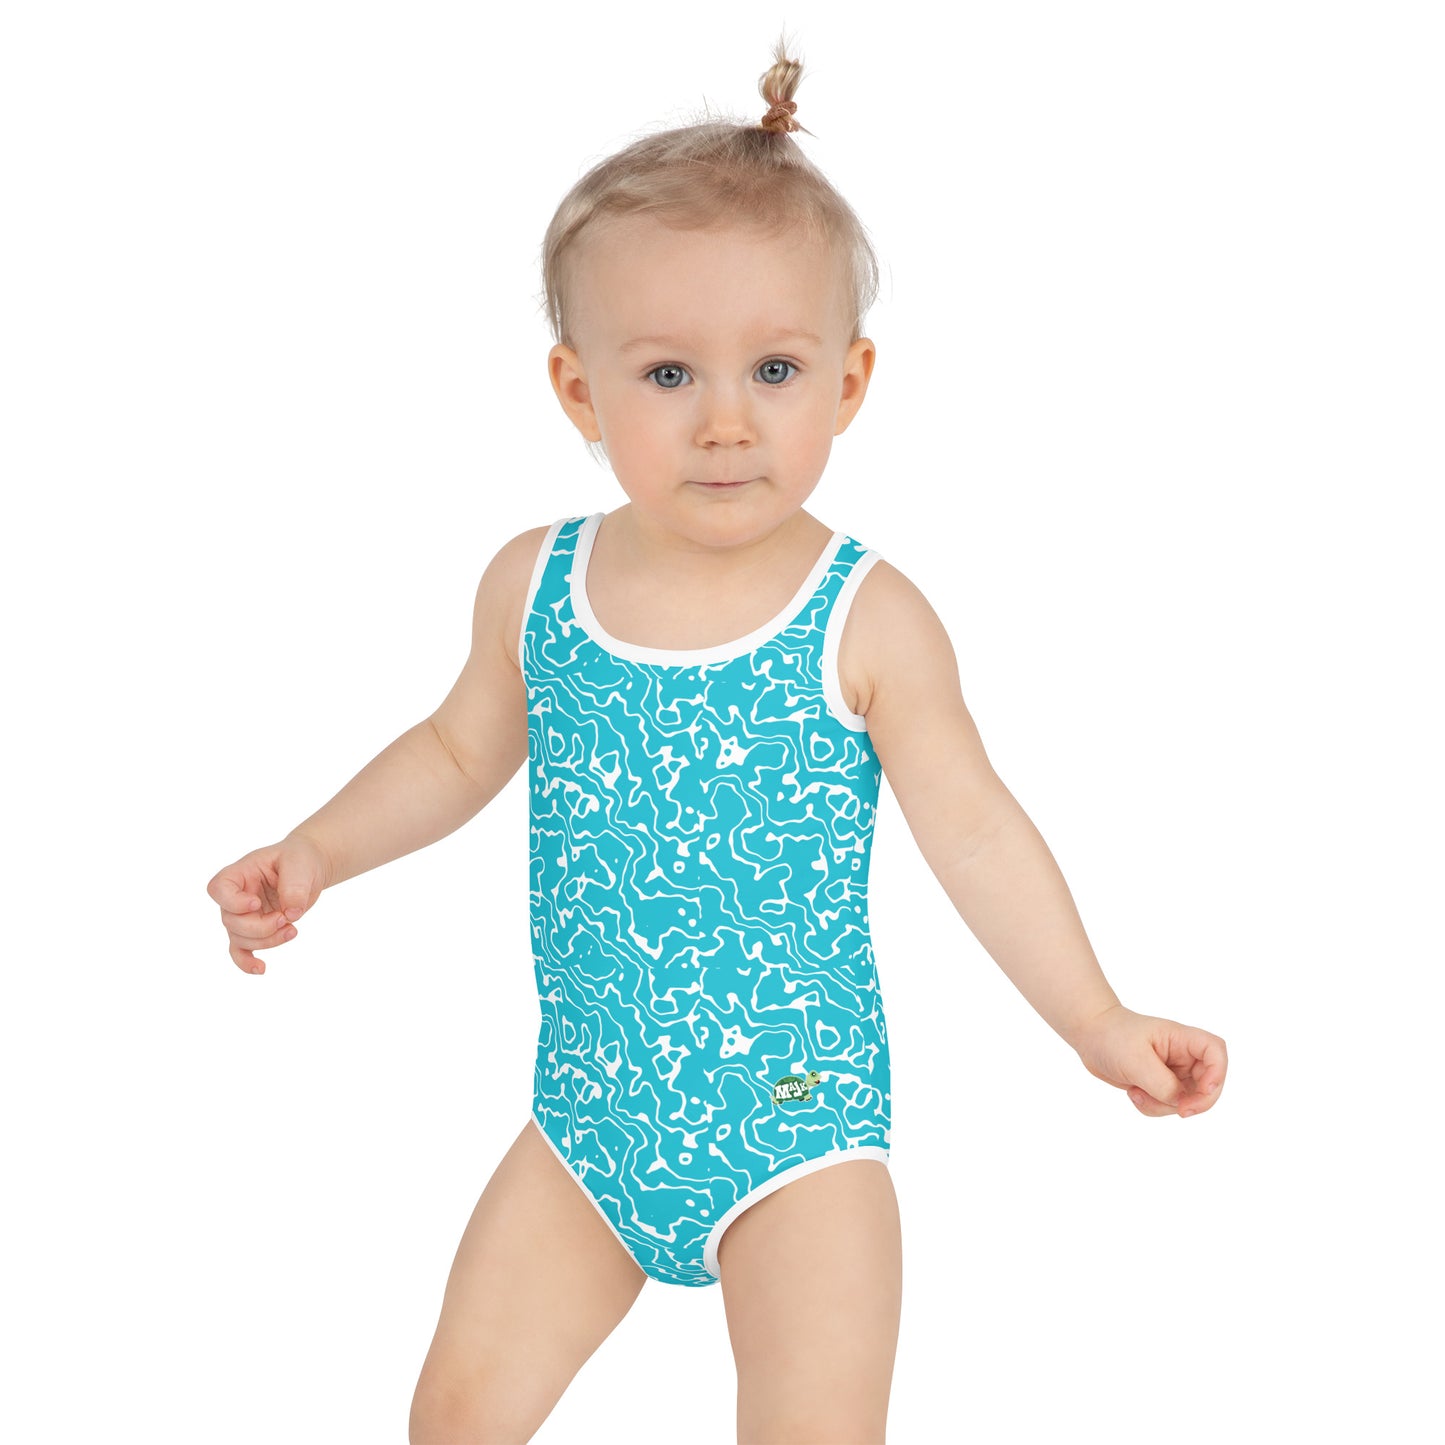 All-Over Print Girl's one-piece Swimsuit "Water ripple"